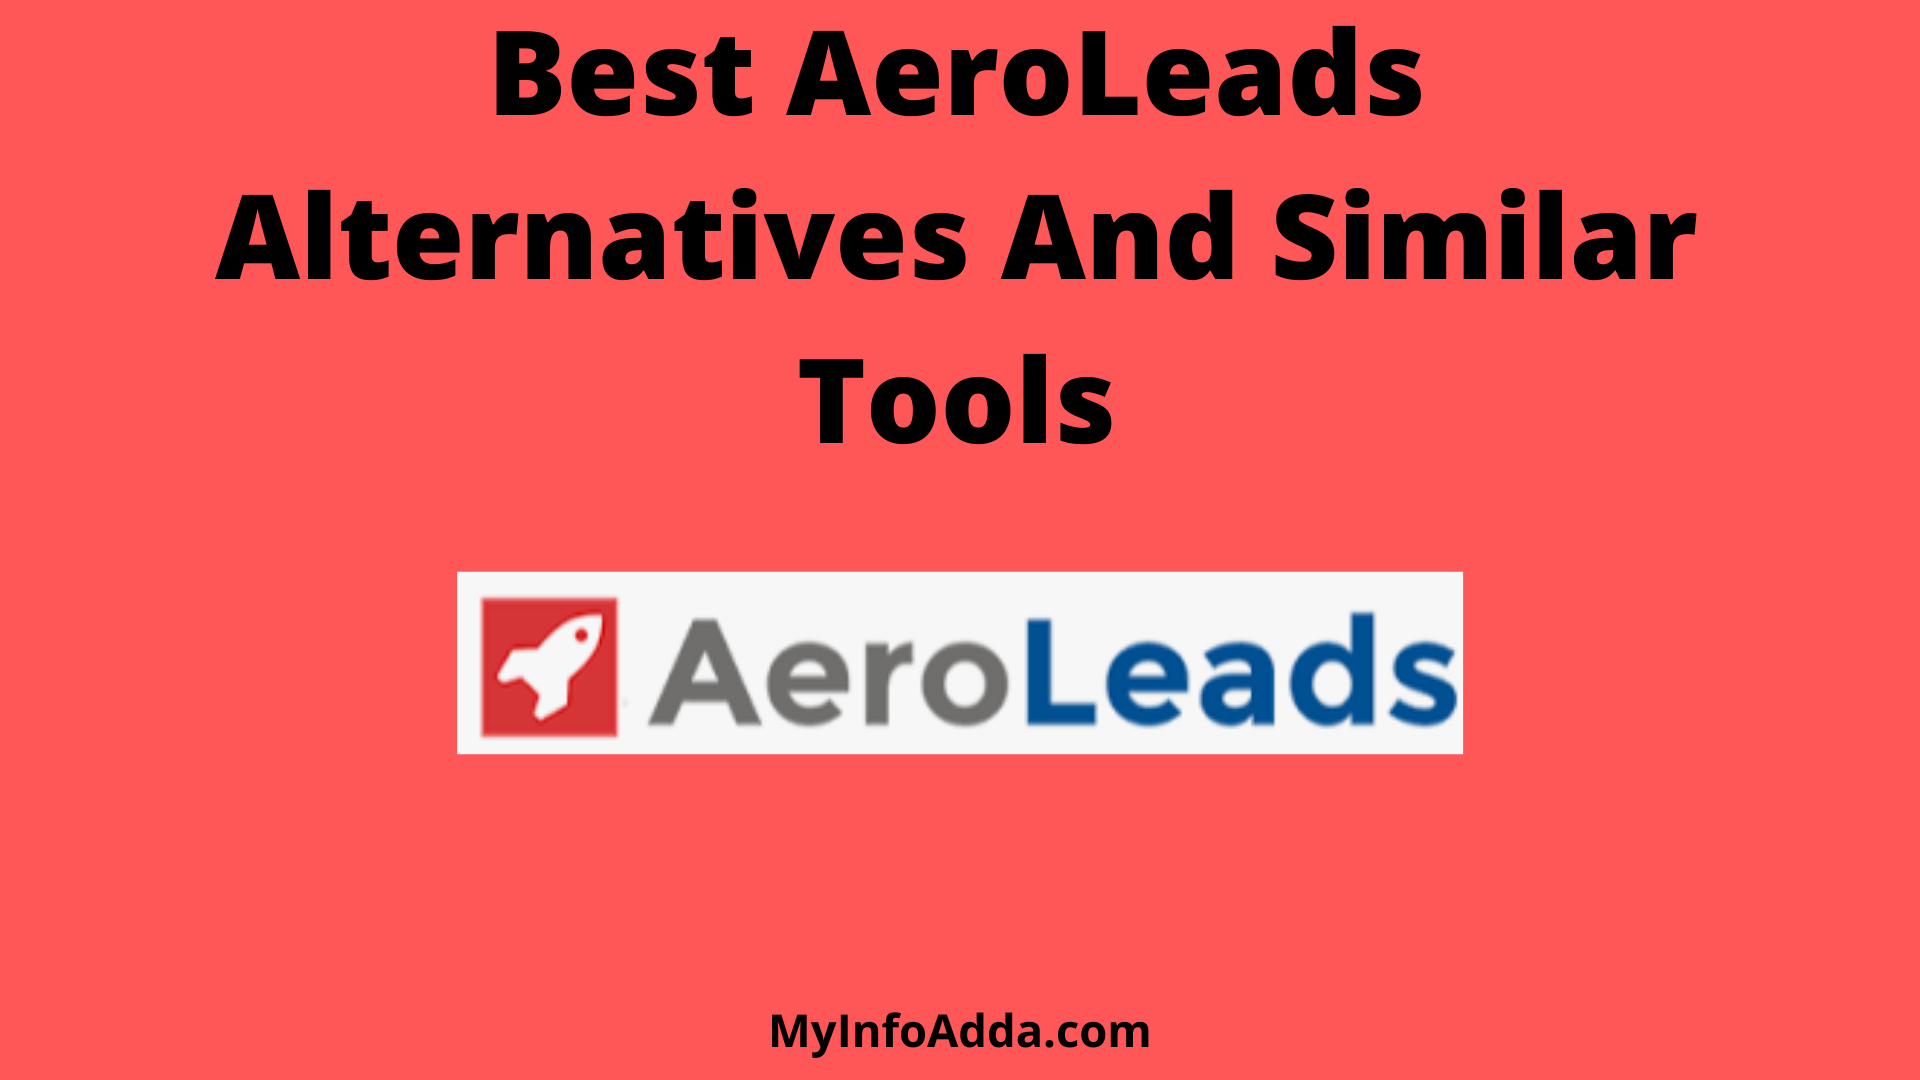 Best AeroLeads Alternatives And Similar Tools